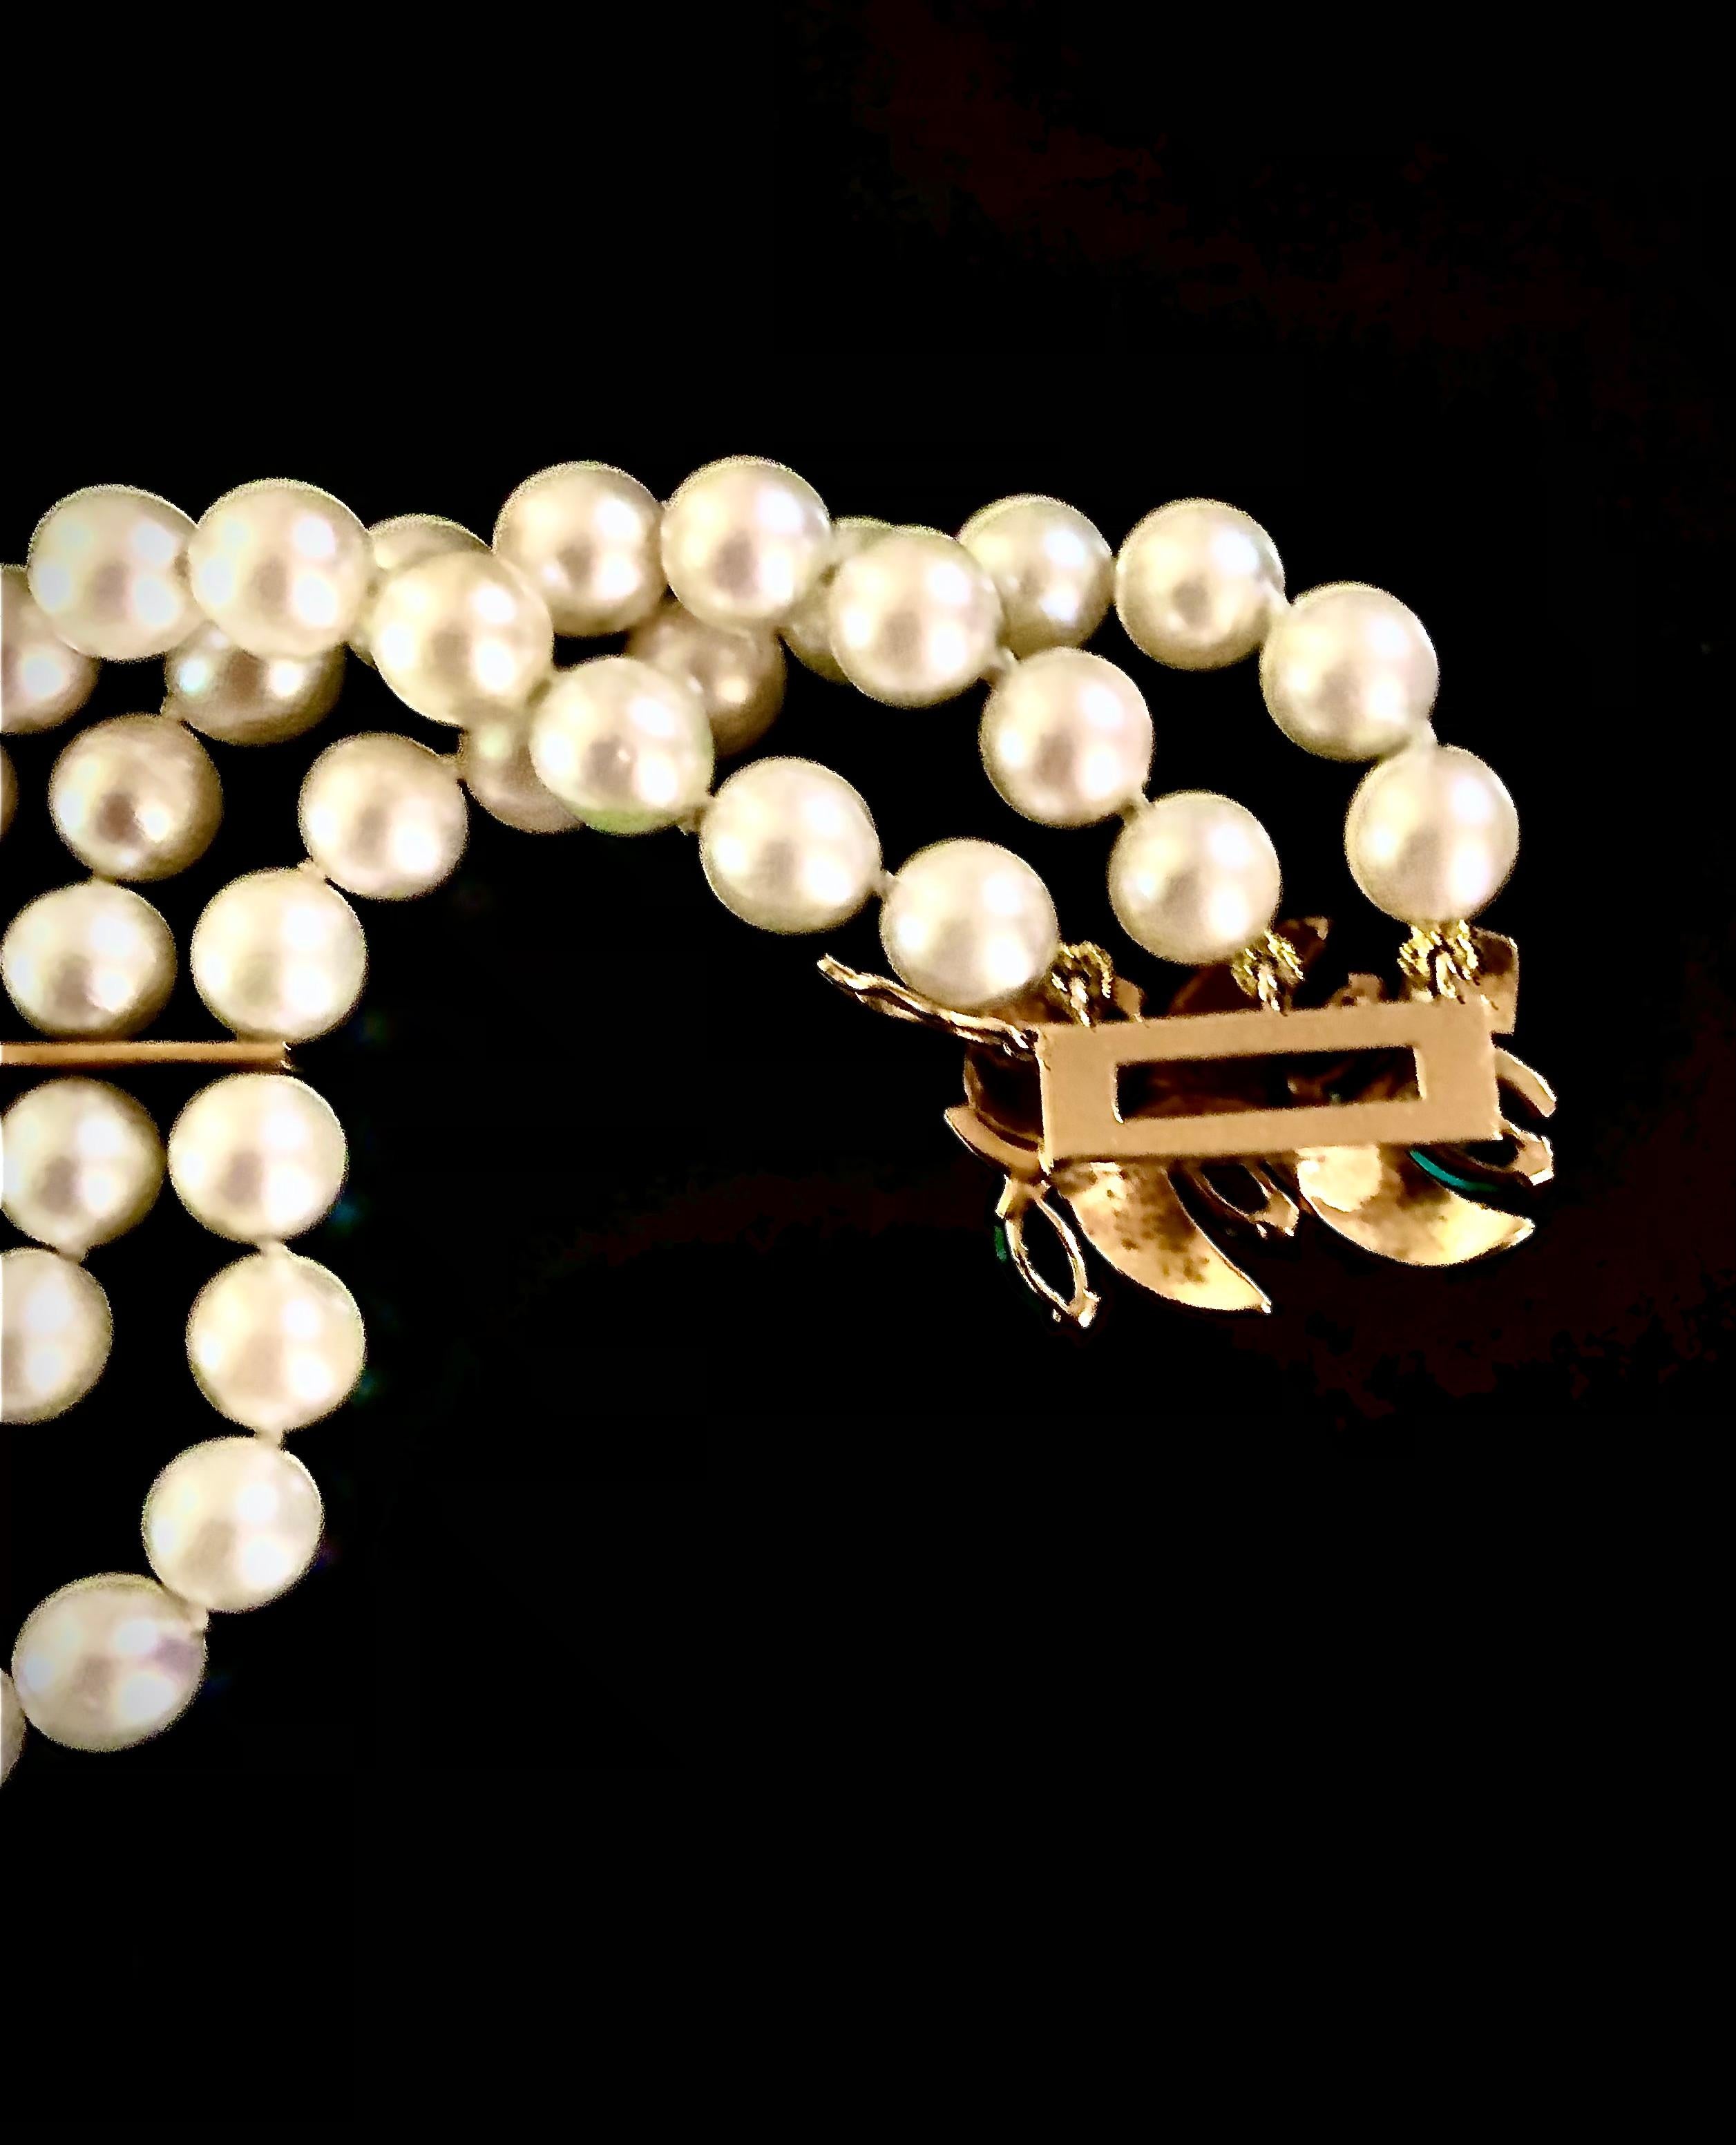 Beautiful bracelet w/ 3 rows of exceptional round high quality cultured pearls In Excellent Condition For Sale In New Orleans, LA